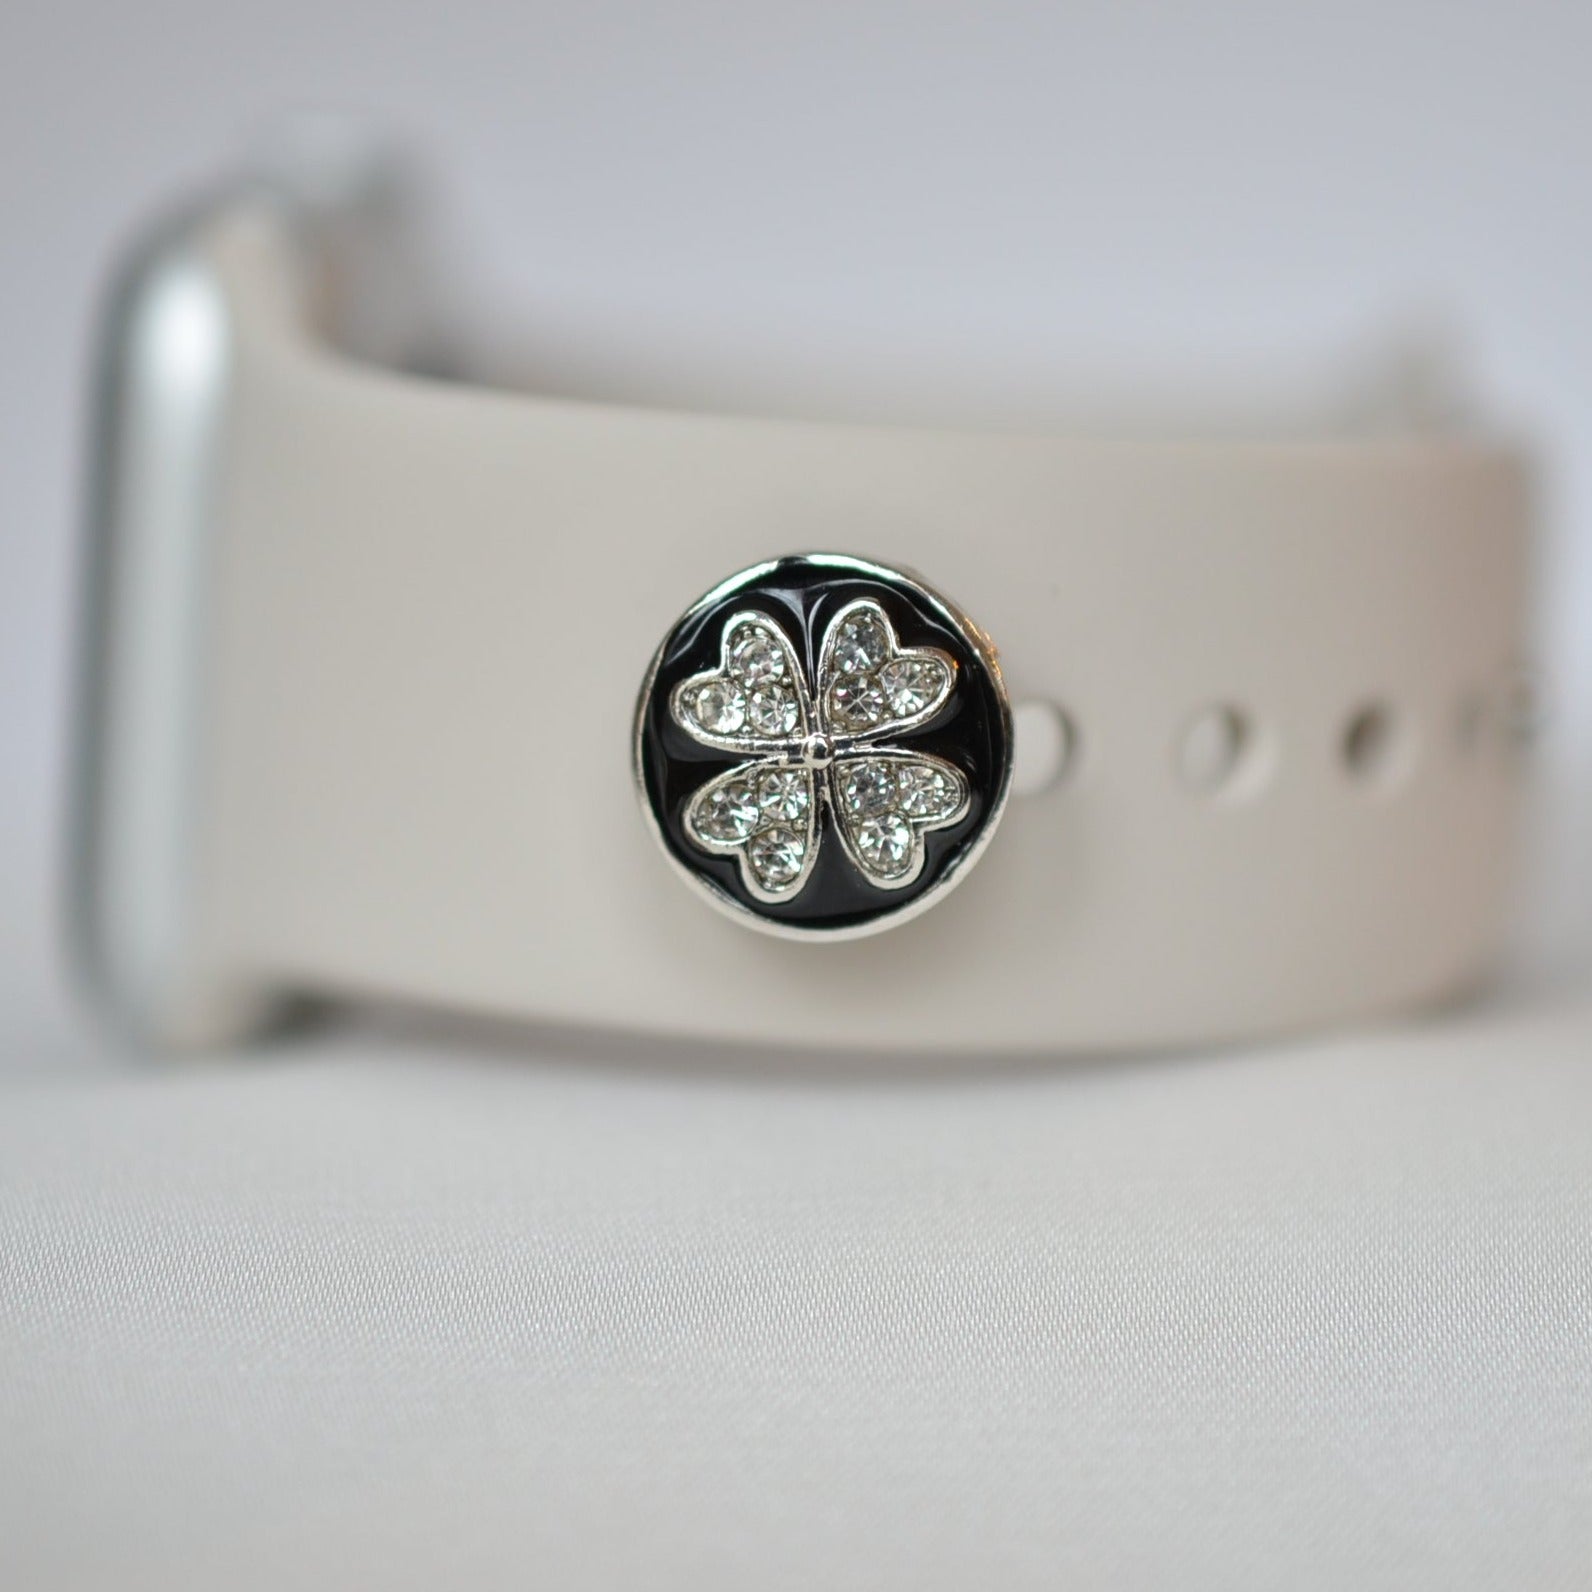 Four Leaf Clover for Belts, Bags and Watch Bands